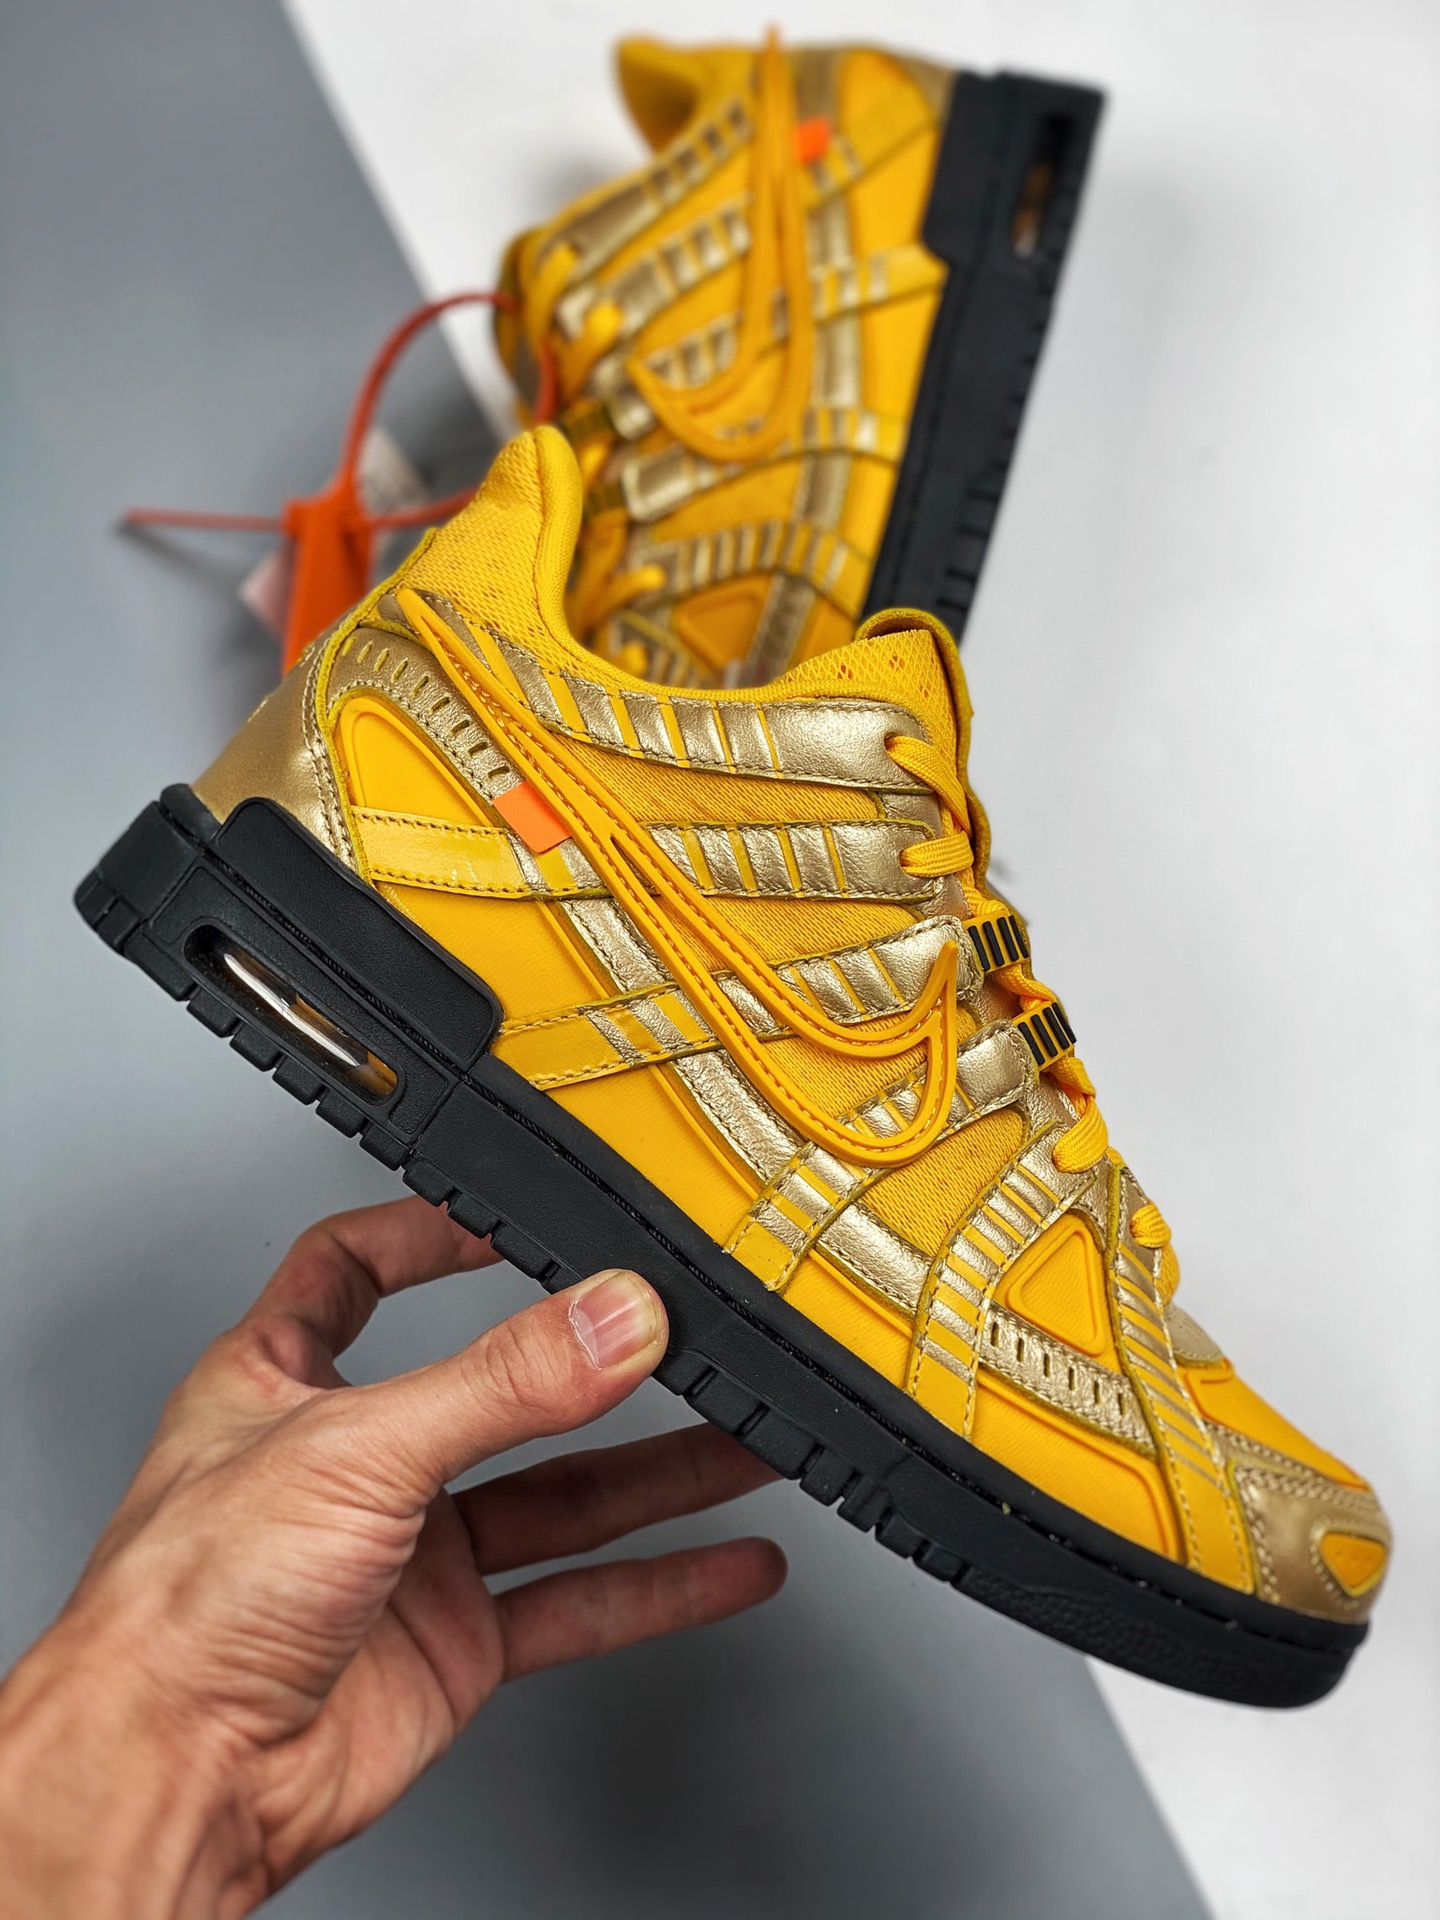 Off-White x Nike Air Rubber Dunk “University Gold” CU6015-700 For Sale ...